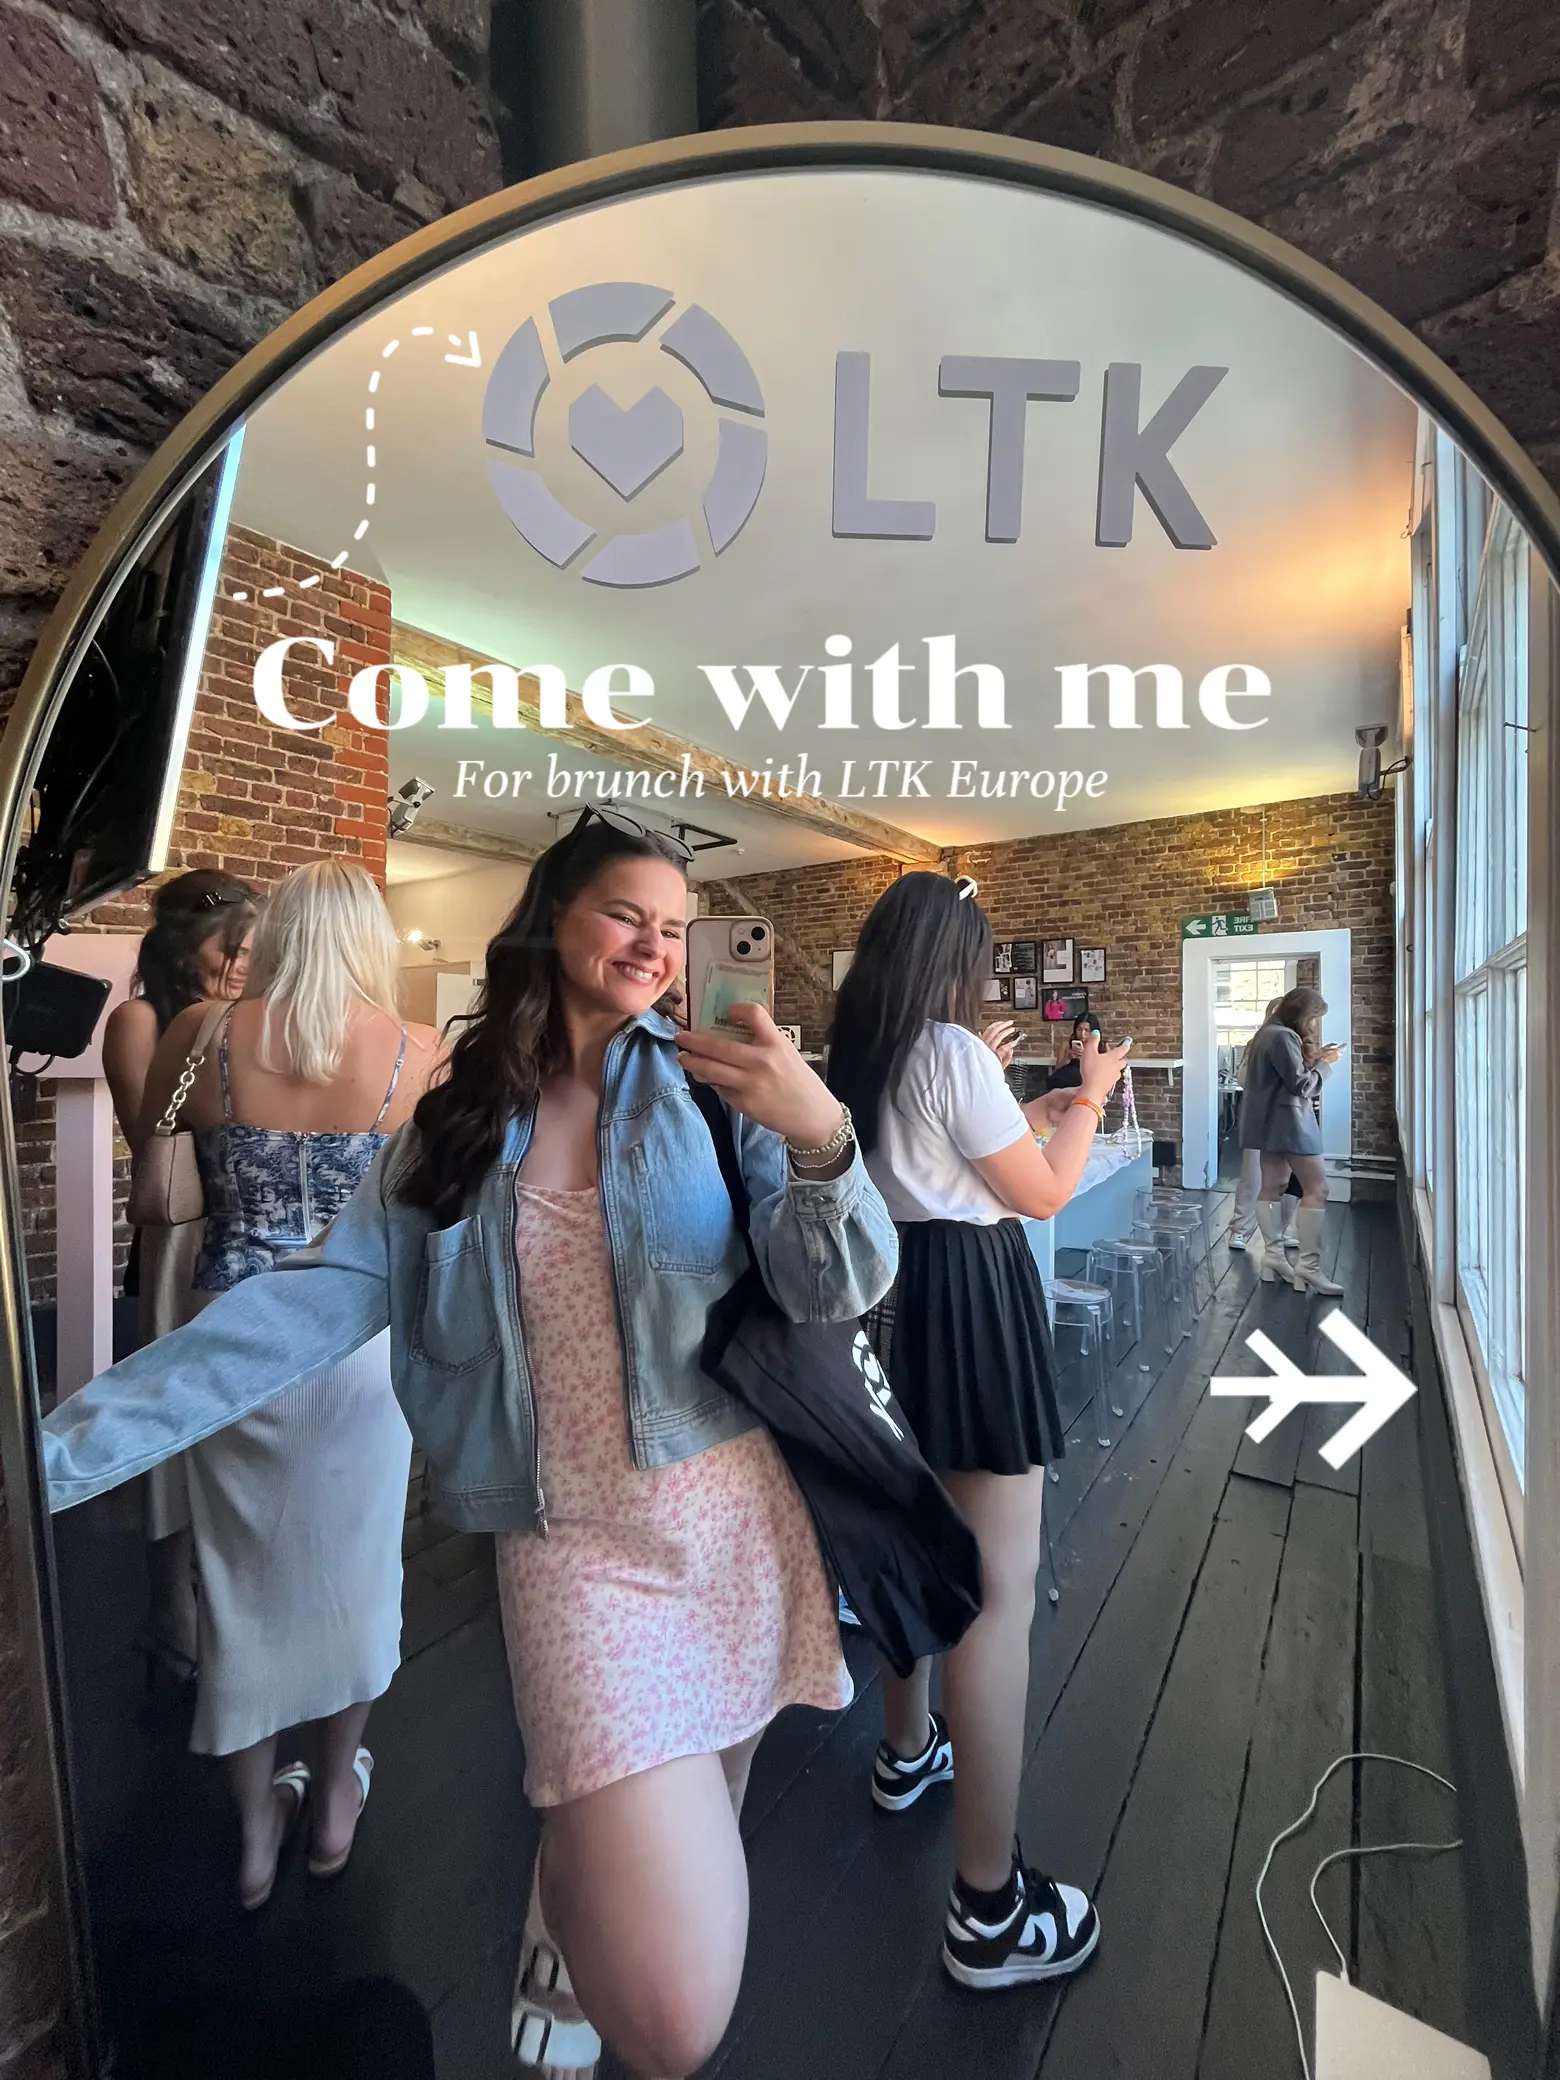 Come with me to a brunch with LTK Europe✨, Gallery posted by Fayes_skin